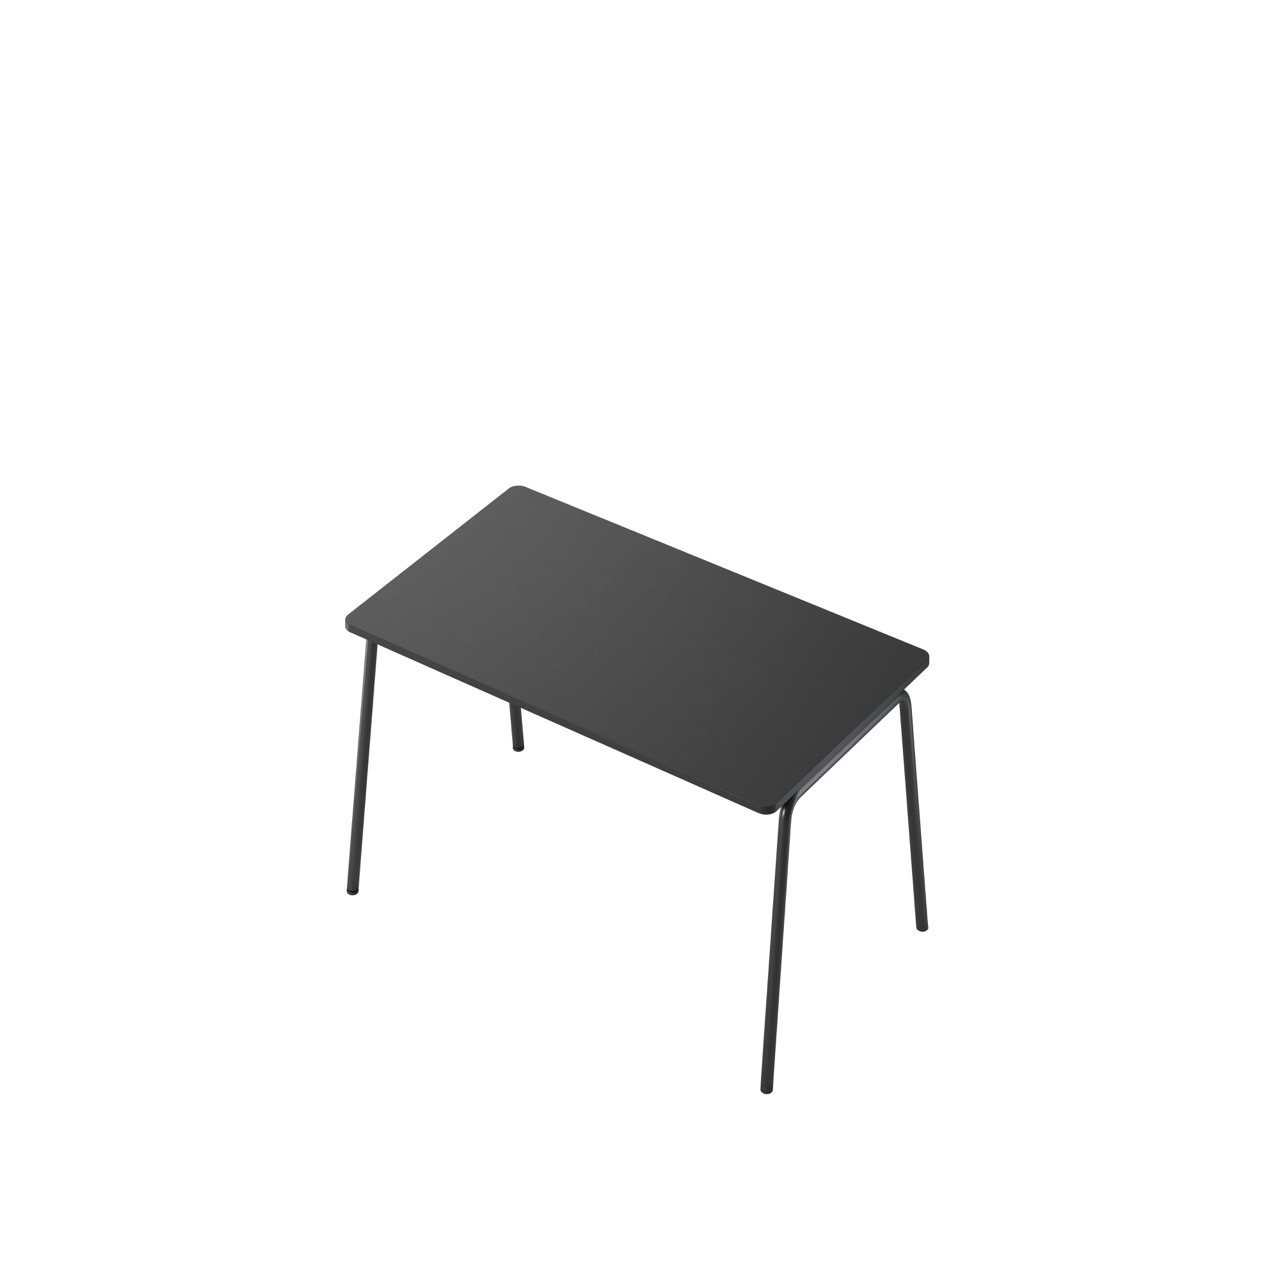 OCEE&FOUR - Tables - FourReal 74 - 140 x 80 - Angled - Packshot Image 1 Large